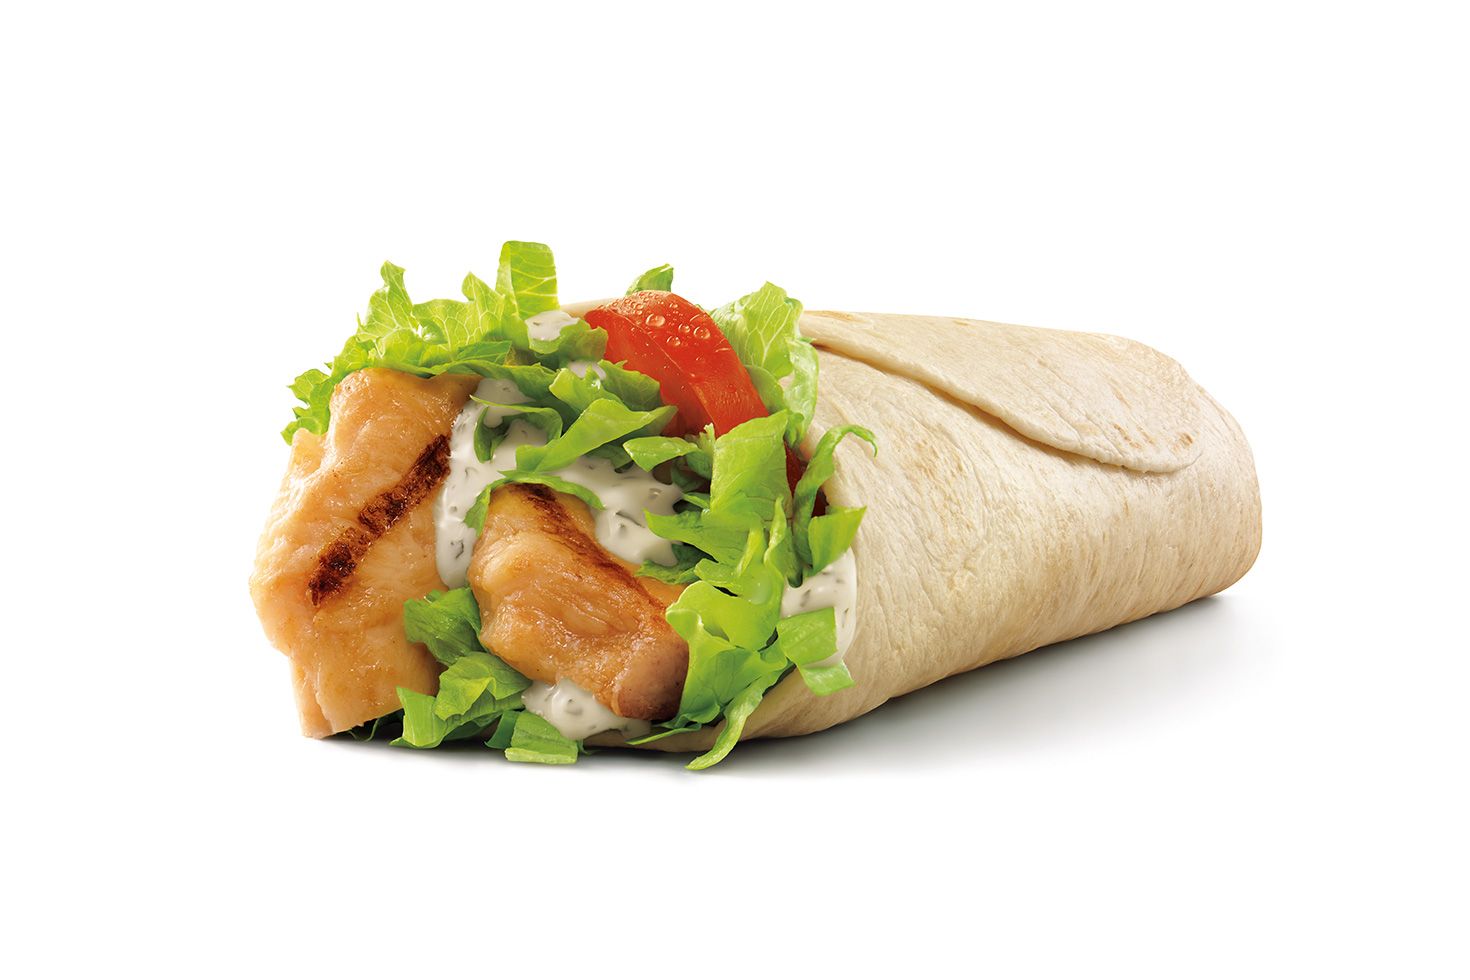 Healthy Food at Sonic: Delicious and Nutritious Options To Try